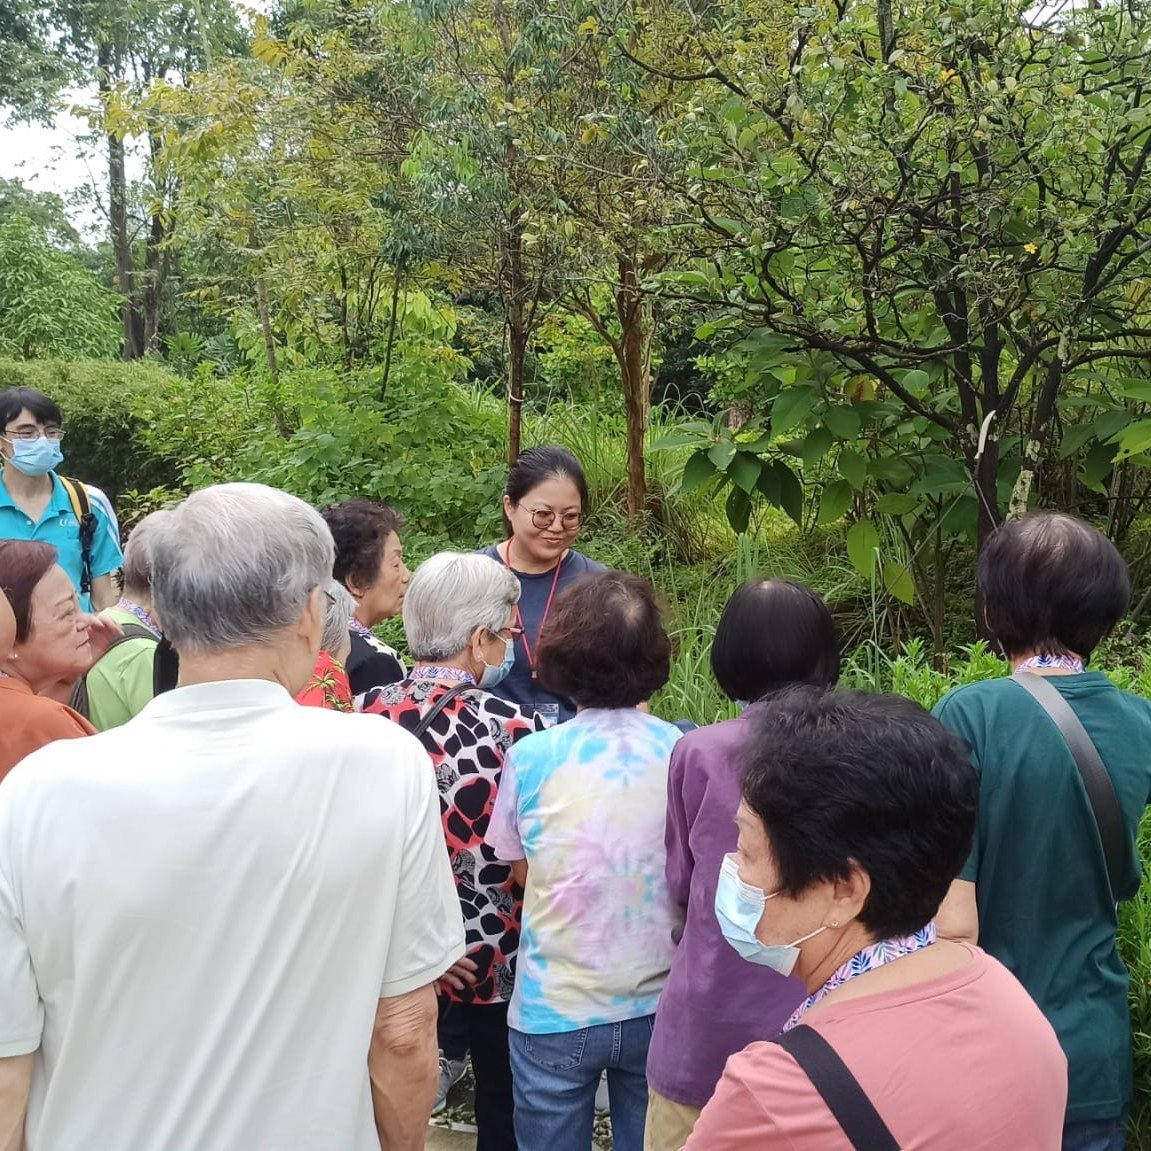 During our recent scented sachet TH session at Jurong Lake Gardens with the seniors, Trainer Cai Ting experienced several memorable moments. As we strolled through the Therapeutic Garden, engaging conversations took place that highlighted the seniors